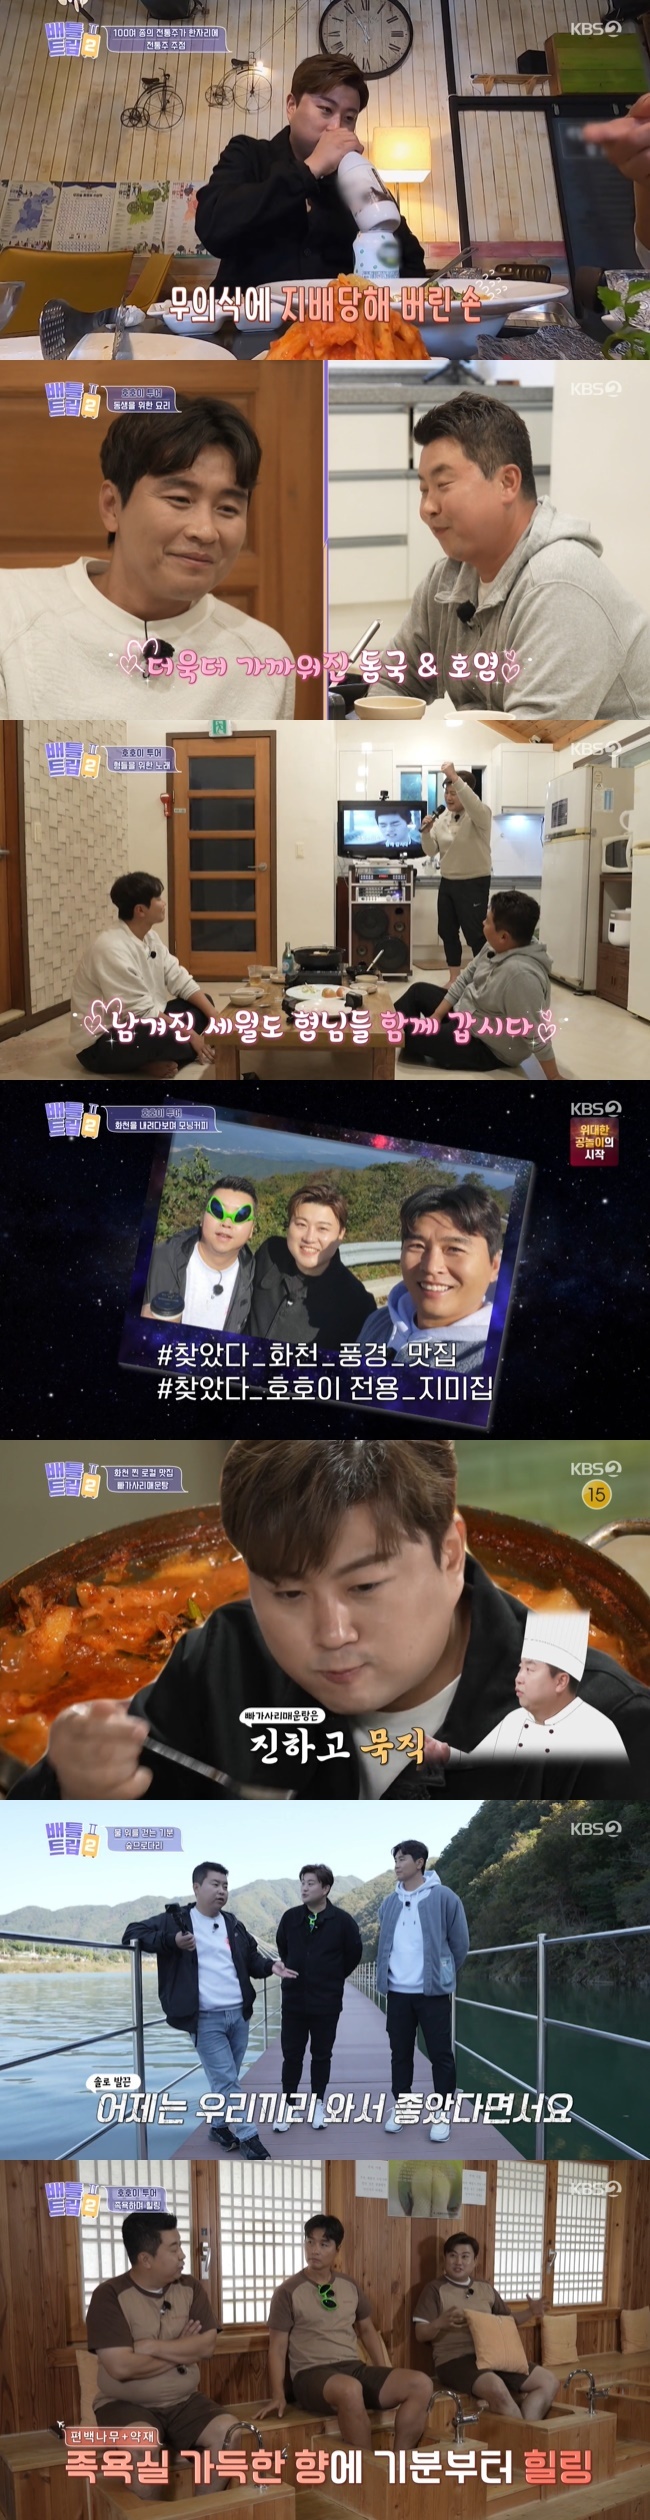 Jeong Ho-young, Kim Ho-joong, and Lee Dong-gook got out of their busy daily life and healed in Hwangeon, South Korea.On November 19, KBS 2TV  ⁇  Battle Trip 2  ⁇  revealed Jeong Ho-young, Kim Ho-joong and Lee Dong-gooks Hwacheon Travel on the theme of hidden treasure travel in Gangwon Province, South Korea.Kim Ho-joong left for Hwacheon with his usual acquaintance, Jeong Ho-young, Lee Dong-gook.The first person, Jeong Ho-young Lee Dong-gook, greeted awkwardly, and the three named each others name Hohoi Tour.The three people who arrived along the navigation to go to the restaurant recommended by the fan were embarrassed to see that the road was broken and the road was submerged.They contacted the Restaurant president with a cell phone communication signal that was barely caught and moved to the Restaurant by motorboat.Kim Ho-joong said that it was the first time he had eaten  ⁇   ⁇   ⁇  in such a spectacular way.Lee Dong-gook ate a lot of bibimbap in Jeonju, but it seems to be the best. There are many kinds of herbs and fresh.Kim Ho-joong also admired that the aroma of the ark is spreading. Jeong Ho-young, who ate the night before, said, Why is it so cold?  Its like jelly. I was surprised to feel this texture for the first time.Three people who took a walk in the clear air in the village of Bisugumi where the Restaurant was located moved to downtown Hwacheon and bought a postcard from the Santa Claus post office and sent a letter to Santa Claus.Jeong Ho-young wished for three days to travel to Finland for four nights and five days, and Lee Dong-gook asked for an answer to the fact that he did not give a comprehensive gift set cookie that he had eagerly wished for 35 years ago.The youngest, Kim Ho-joong, returned to her innocence, inviting Santa Claus to the concert.The Ho-hoi team went to a traditional tavern and ordered Hwacheon Makgeolli, a mountain fish Makgeolli. Kim Ho-joong was excited to drink Makgeolli, but suddenly darkened when he said he had to drive.Kim Ho-joong, who was soothed by grape juice, laughed as he grabbed the Makgeolli bottle and smelled it.After arriving at the hostel, Jeong Ho-young made beef tomato hotpot with Hanwoo while two people changed clothes.It was a consideration for Kim Ho-joong who did not drink properly. Kim Ho-joong was impressed that he was  ⁇   ⁇   ⁇  today.Kim Ho-joong, who admired the taste of the hotpot made by Jeong Ho-young, said, I was really looking forward to today.Lee Dong-gook seems to have been around for a long time, but he seems to have known him for a long time.Jeong Ho-young, who exchanged contacts with Lee Dong-gook, was delighted to be here in a busy situation in Seoul.Kim Ho-joong sang Thank you with a karaoke machine for his brothers. Kim Ho-joong When the song came out, the performers who watched the video laughed.Kim Ho-joong said, Lets go together with the remaining years. Allerview. My brother-in-law showed off his affection.On the second morning, the three of them drank coffee in the clear air at the observatory where they had not been able to go the night before because of cloudy weather.Lee Dong-gook, who proposed photography, transformed into a human Jimmys house and took a group photo, and Kim Ho-joong and Jeong Ho-young admired that the photo was different.The three went to the recommended Pagasari (Dongjagae) Maeun-tang shop, where Jeong Ho-young found the best seafood restaurant in Hwacheon.Kim Ho-joong, who ate Maeun-tang, confessed that he had preconceptions because of the smell of soil.Lee Dong-gook also admitted that he could chew it with his tongue and eat it with his tongue.The owner handed out 25-year-old wild ginseng wine, and Kim Ho-joong said, Its different in flavor. Its different in hitting.The three of them thought of their family as they admired the view from the bridge with the transparent glass skywalk and forest, and finally finished the Hwacheon Travel with a foot bath in the mountain herb village.